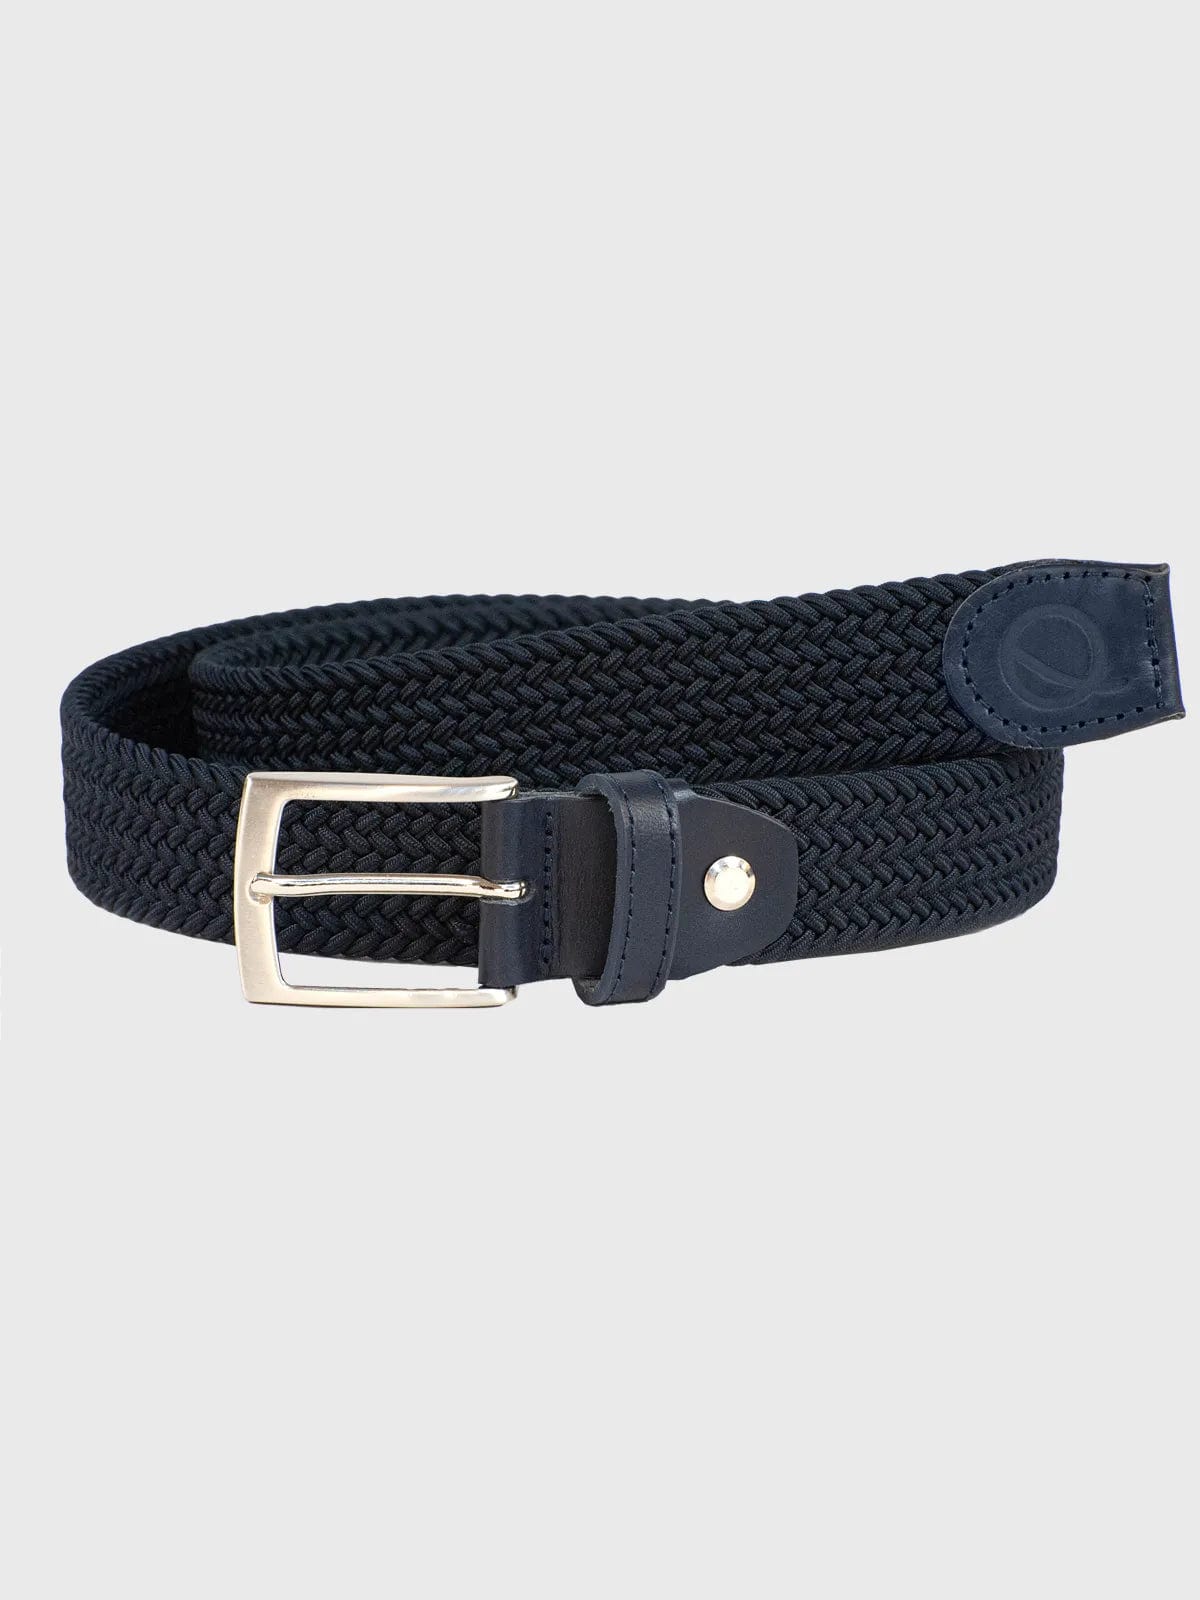 Black Clover Braided Stretch Navy/White/Grey 3 Tone Belt at  Women's  Clothing store